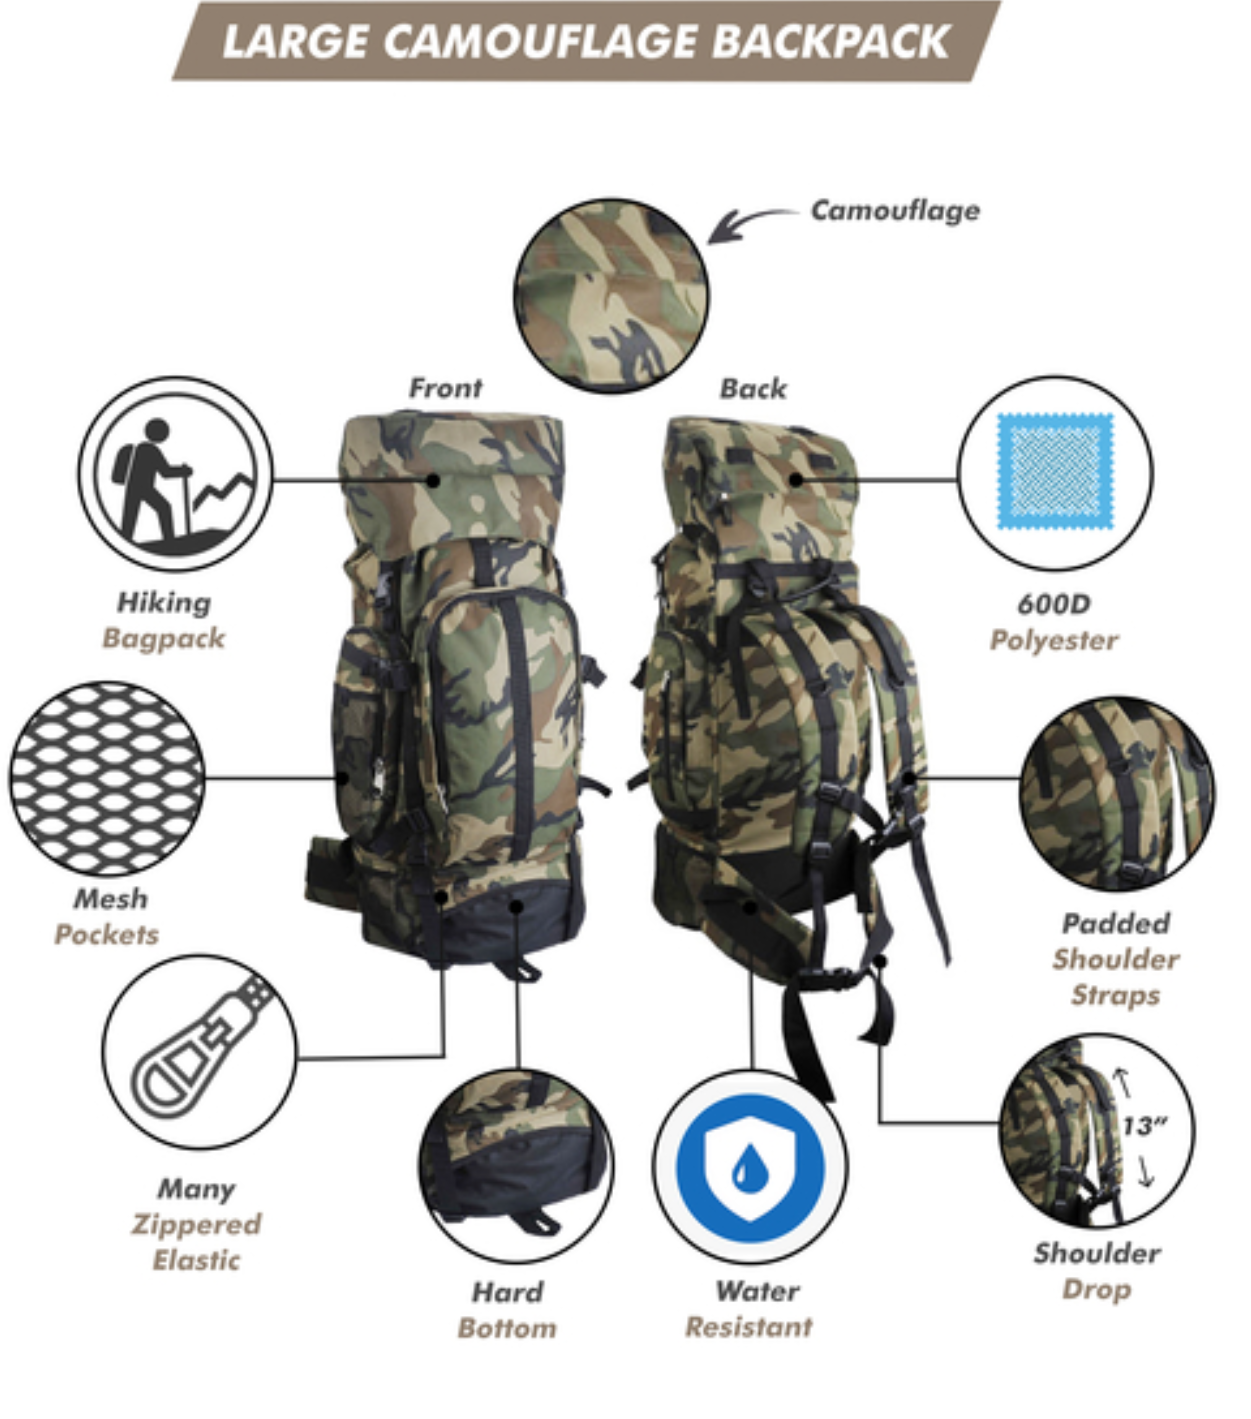 Travel Backpack - Waterproof Hiking & Camping Backpack - Large Lightweight Heavy Duty Outdoor Camouflage 30" Day Pack